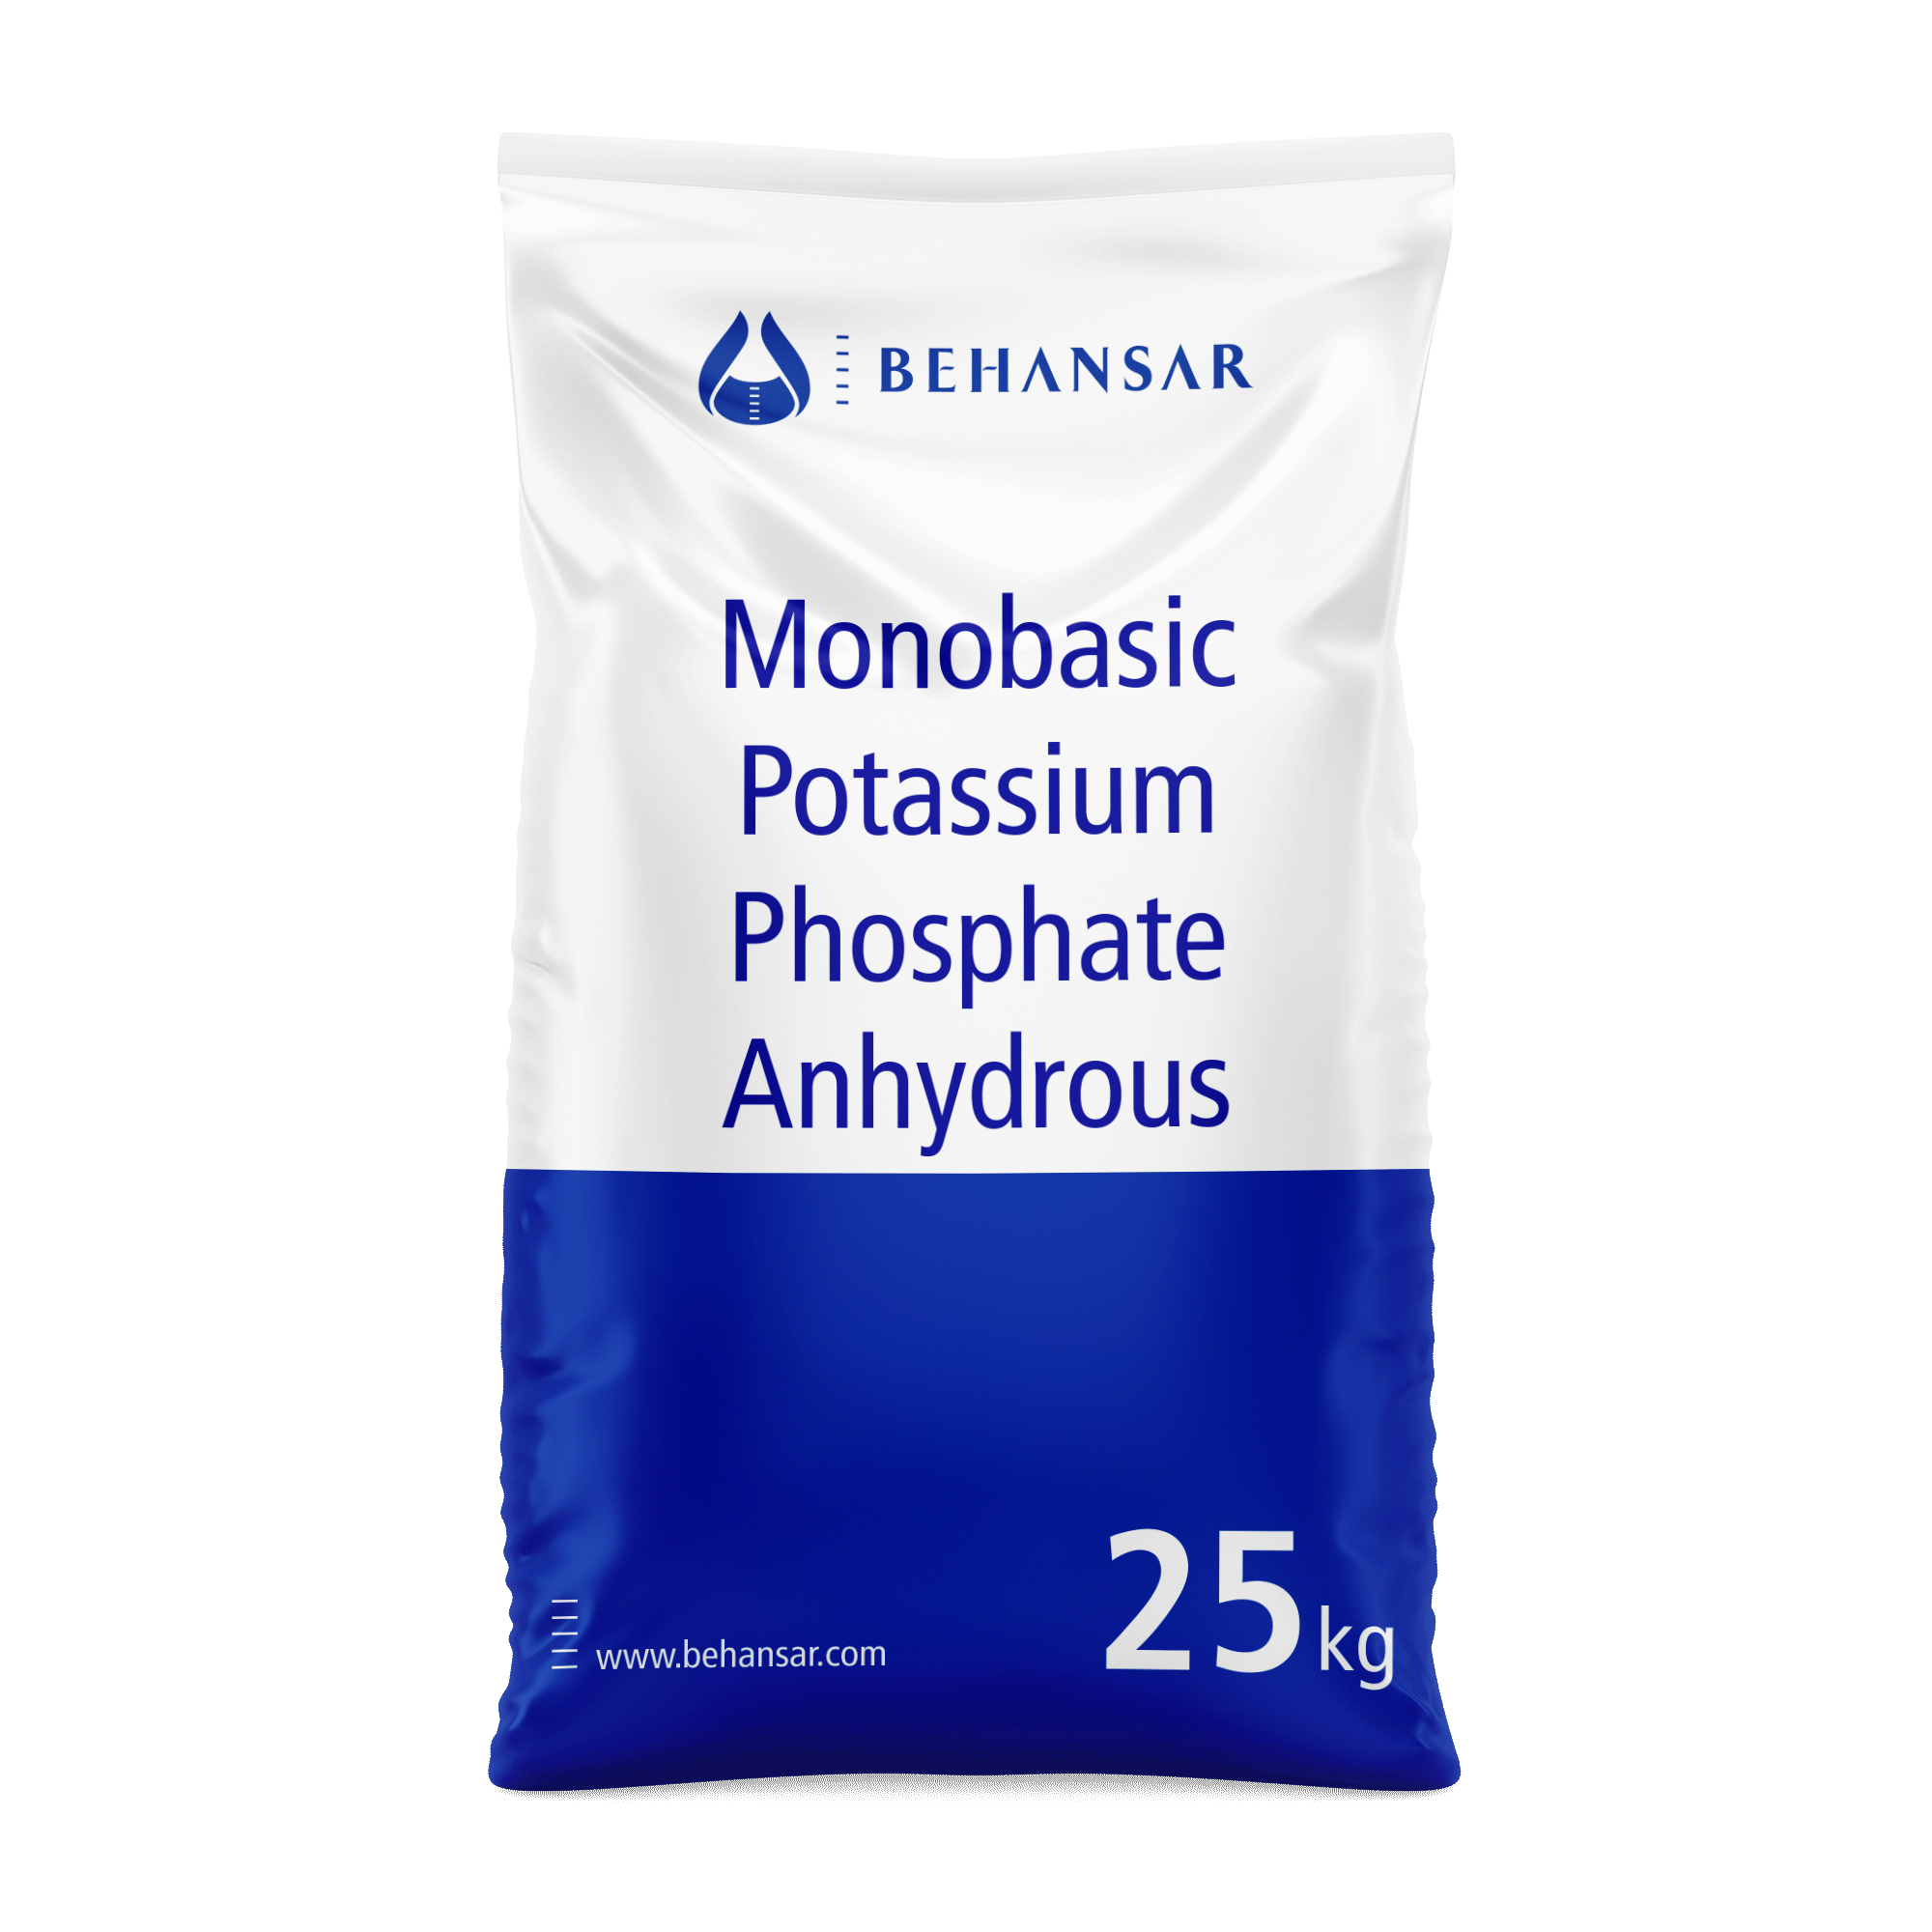 Monobasic Potassium Phosphate Anhydrous is one of the products of Behansar Co